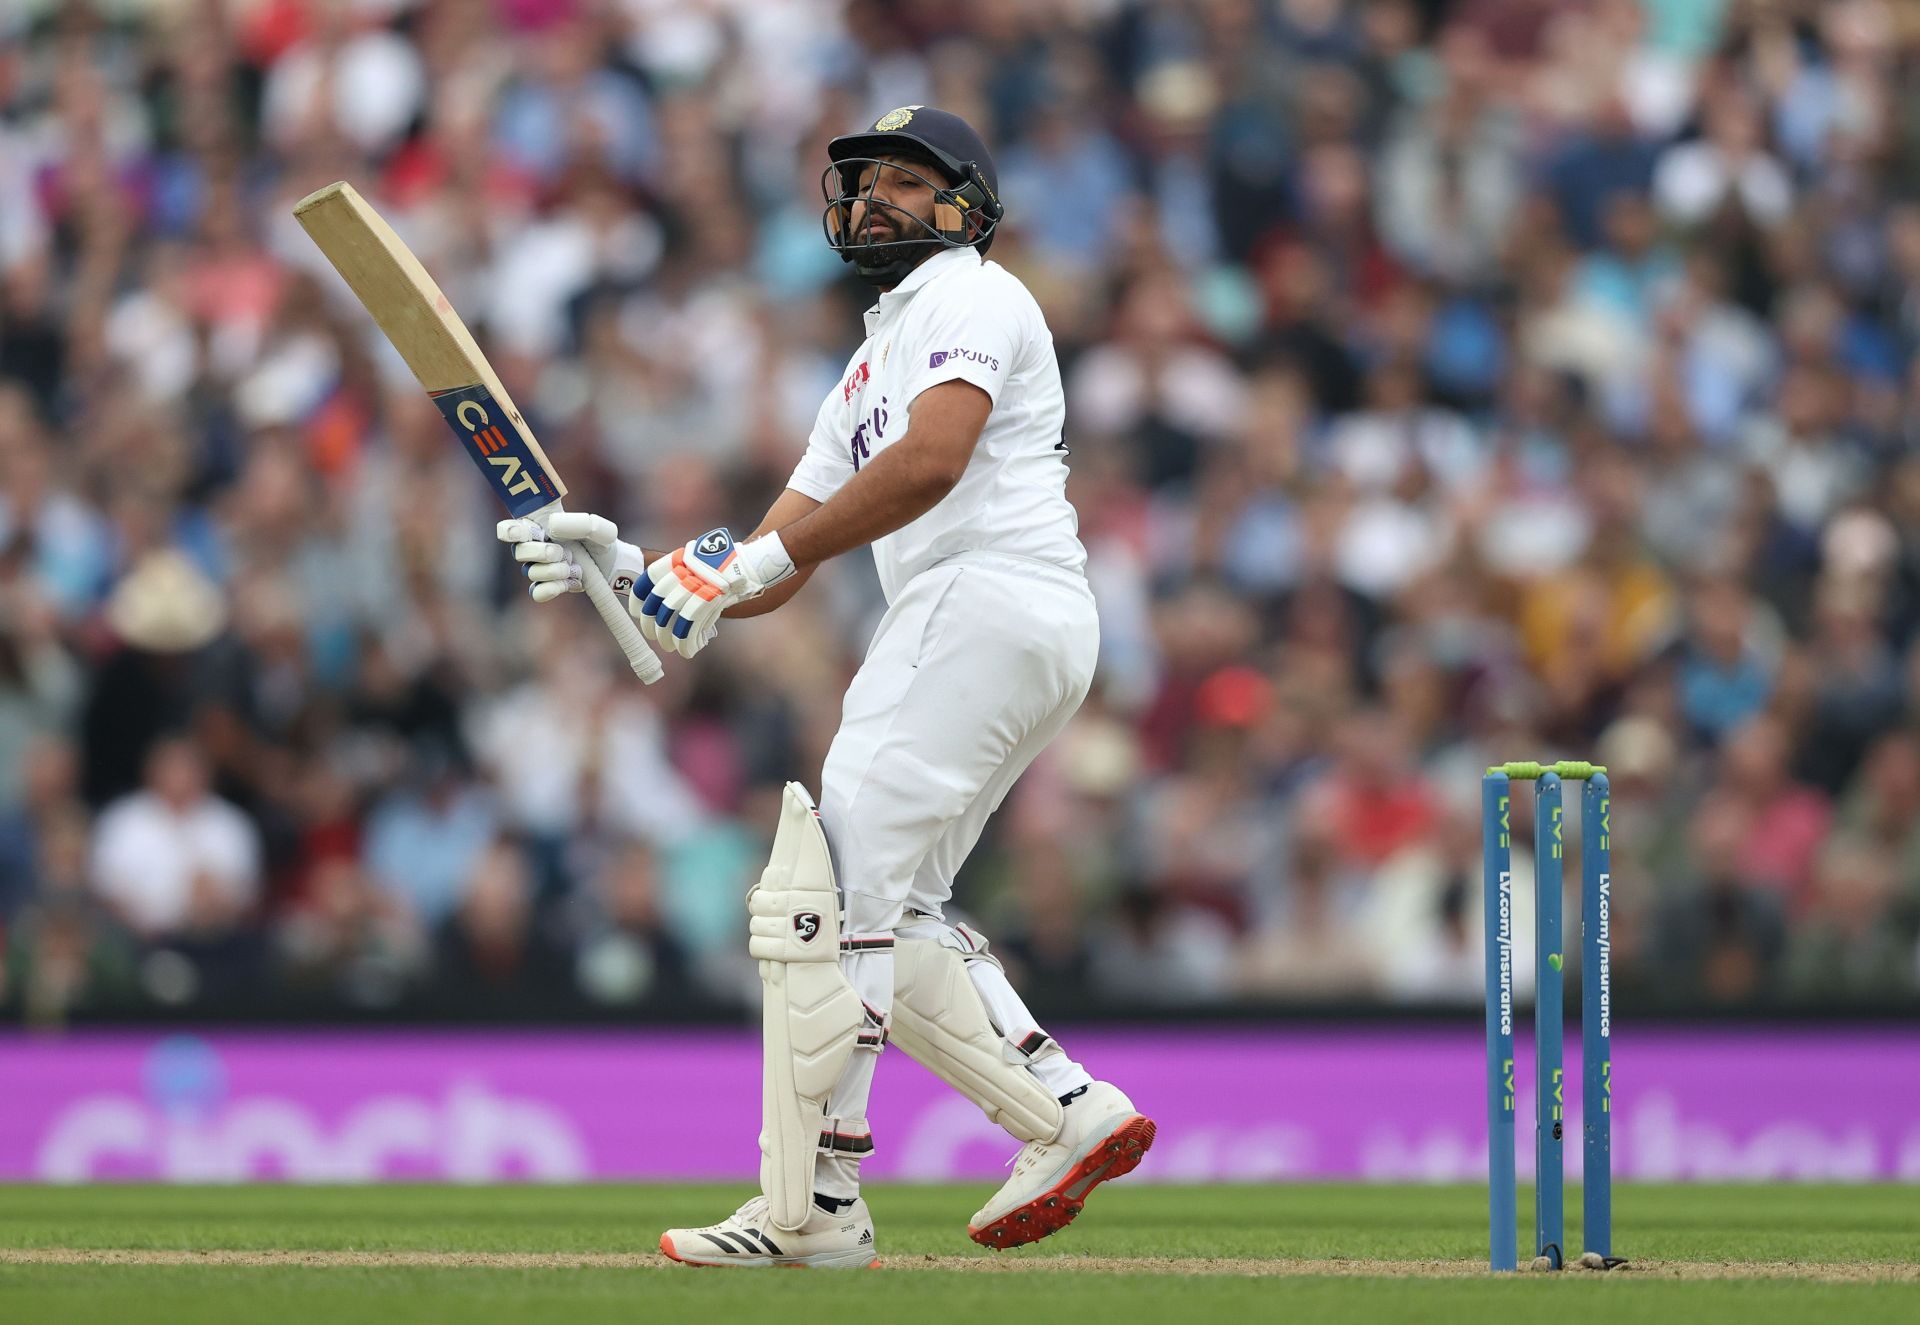 Rohit Sharma has been dismissed while playing the pull shot quite often.